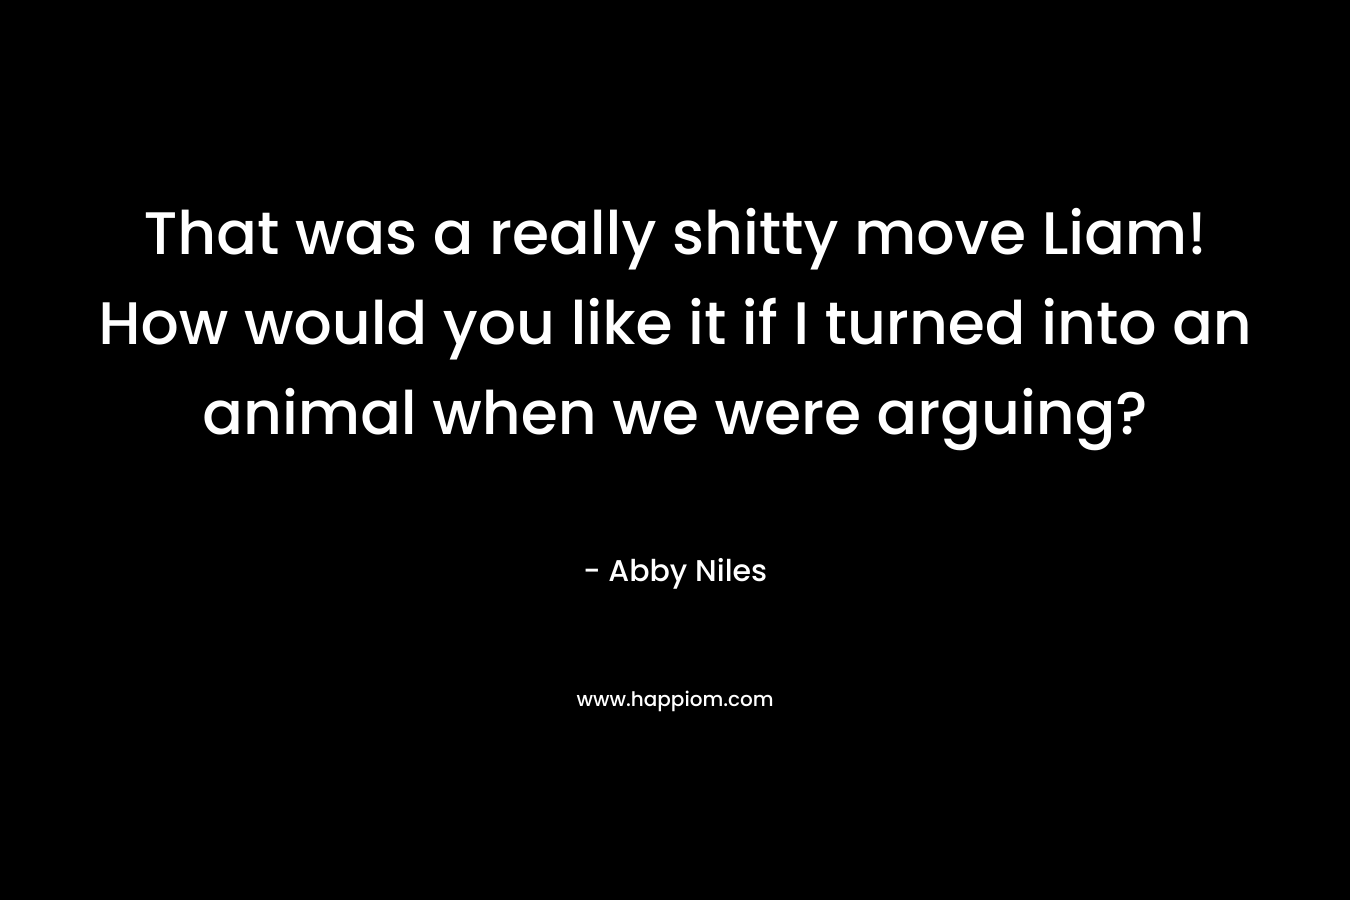 That was a really shitty move Liam! How would you like it if I turned into an animal when we were arguing? – Abby Niles